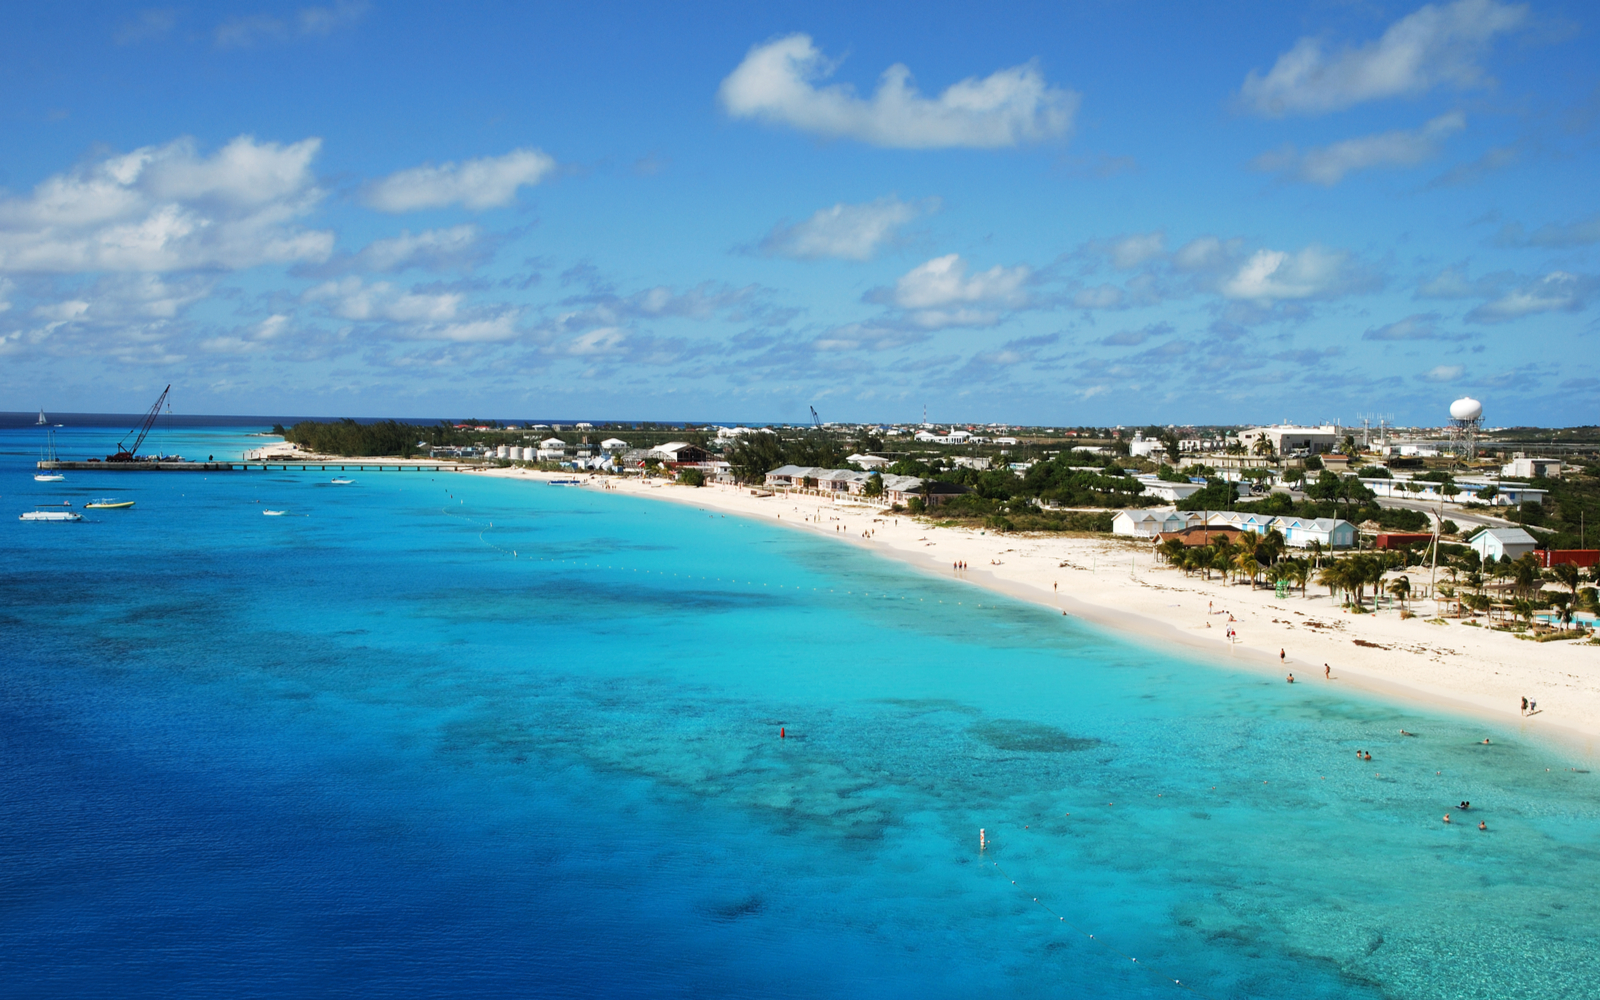 Where to Stay in Turks and Caicos in 2023